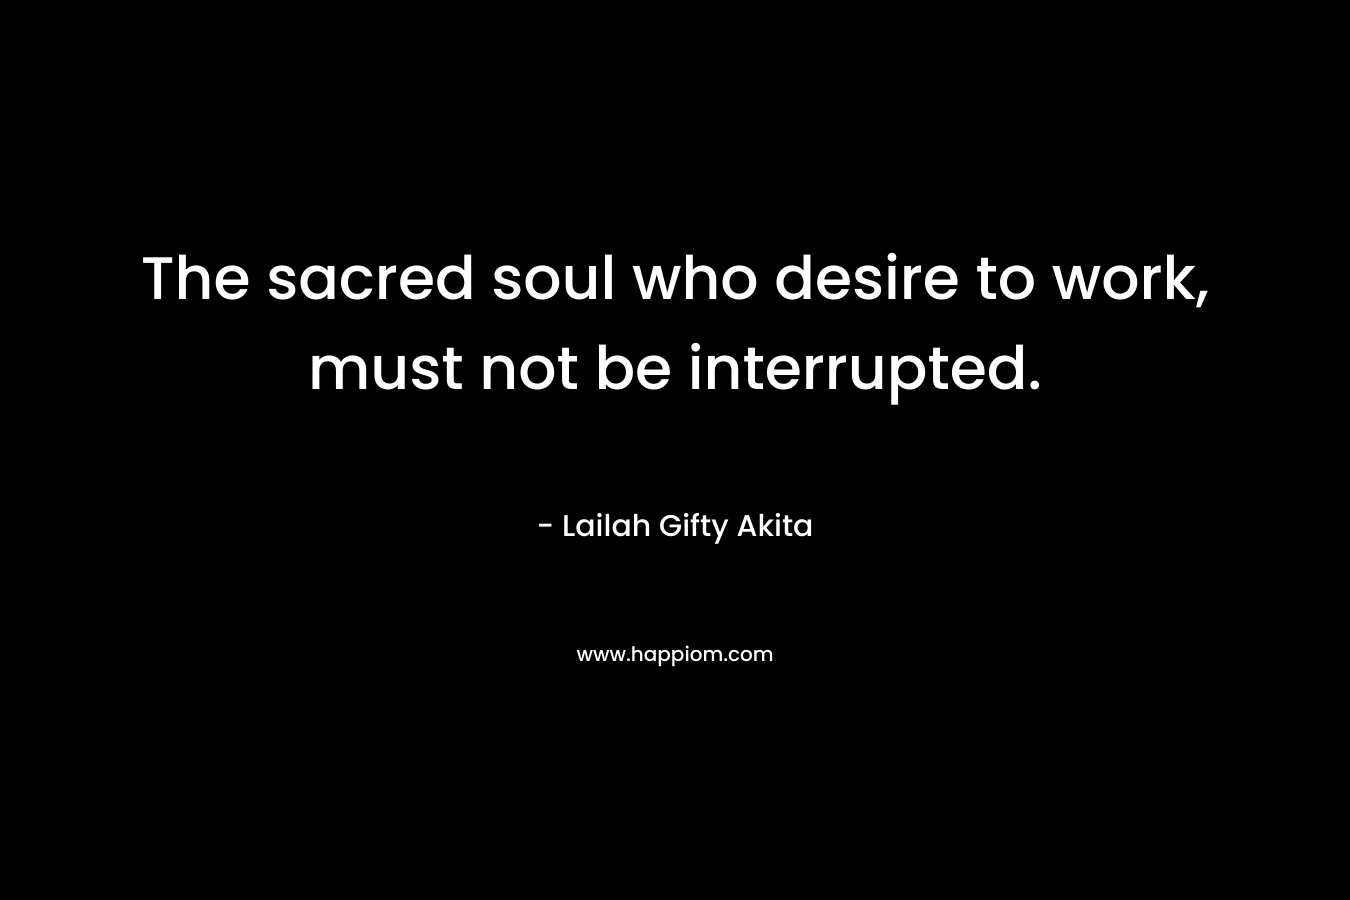 The sacred soul who desire to work, must not be interrupted.